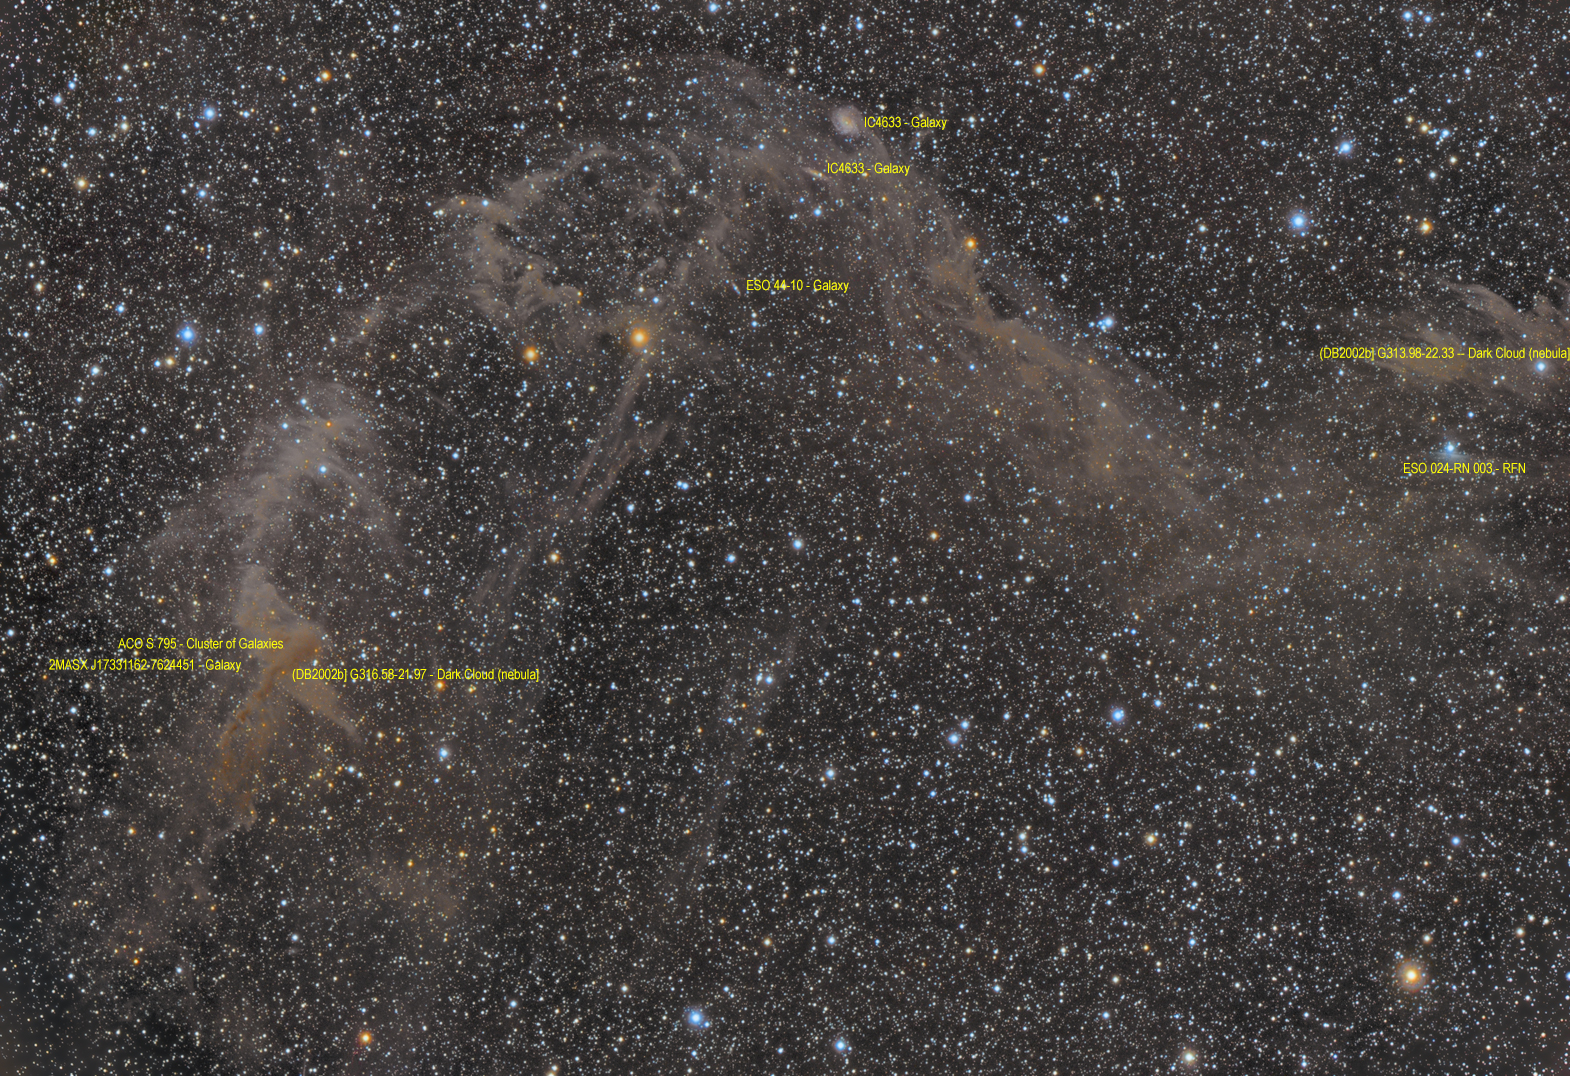 Jacobs Ladder - IC4633, IC4635 and IFN in Apus (also Sarahs Nebula) - Annotated Version